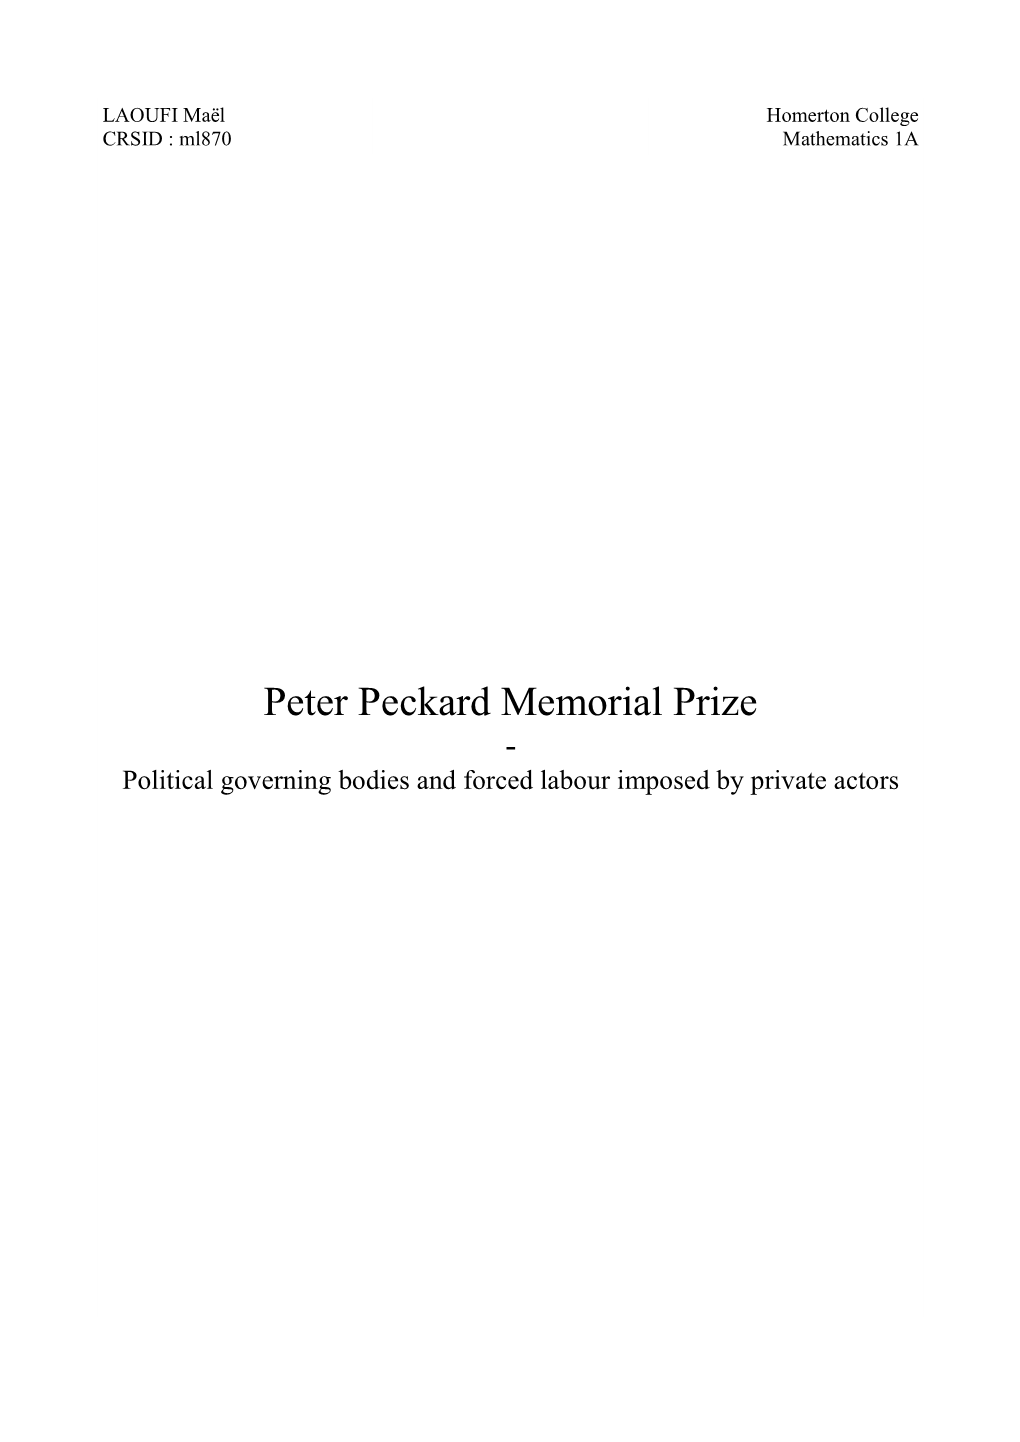 Peter Peckard Memorial Prize - Political Governing Bodies and Forced Labour Imposed by Private Actors Preliminary Notes